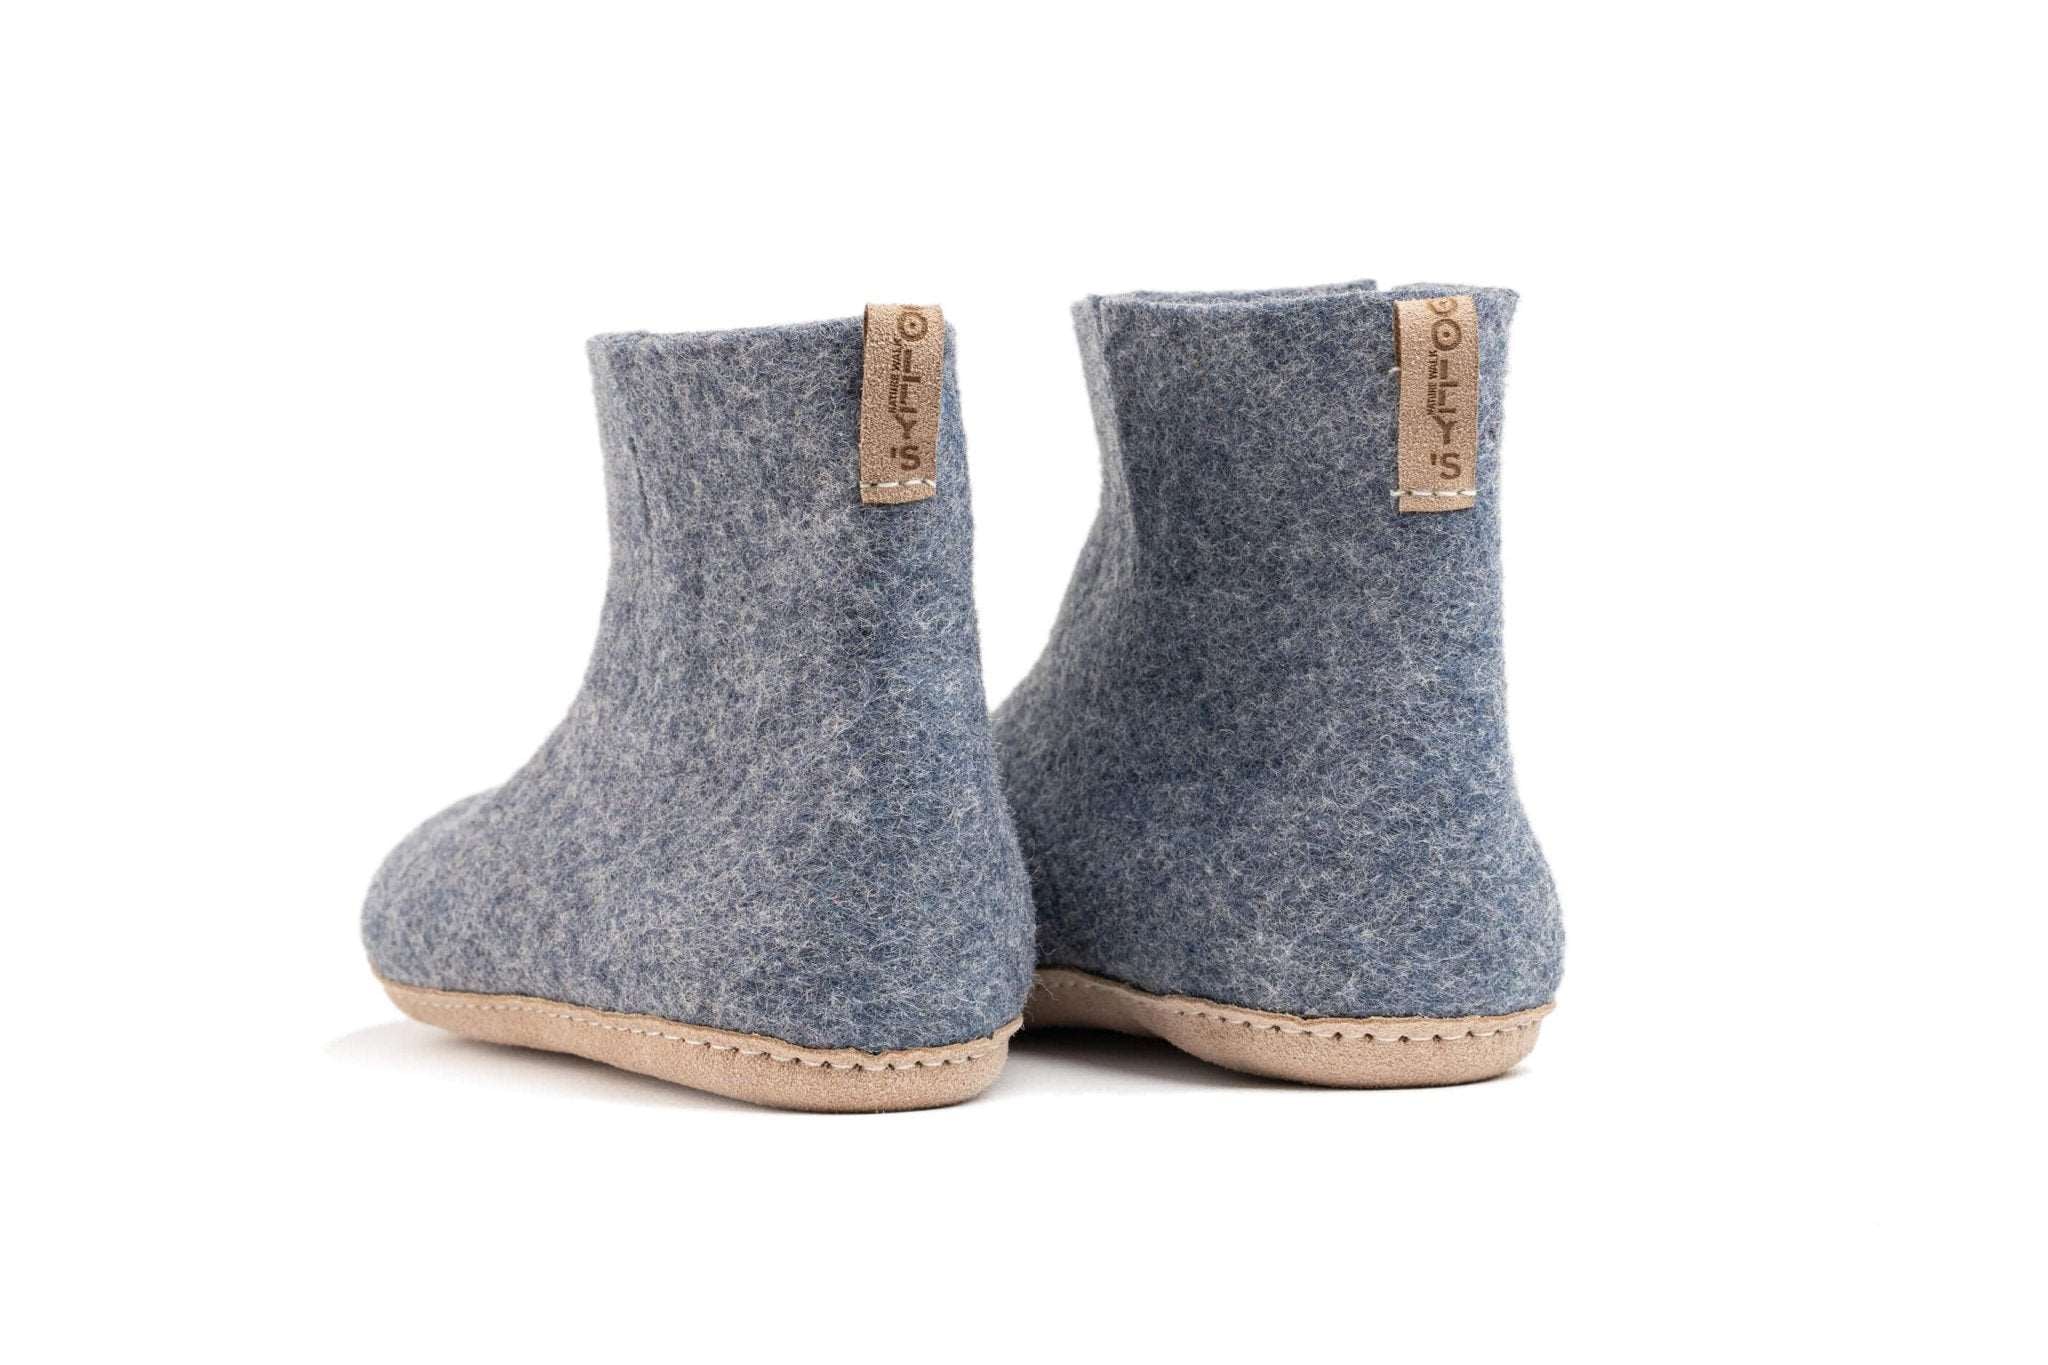 Indoor Boots With Leather Sole - Denim - Woollyes